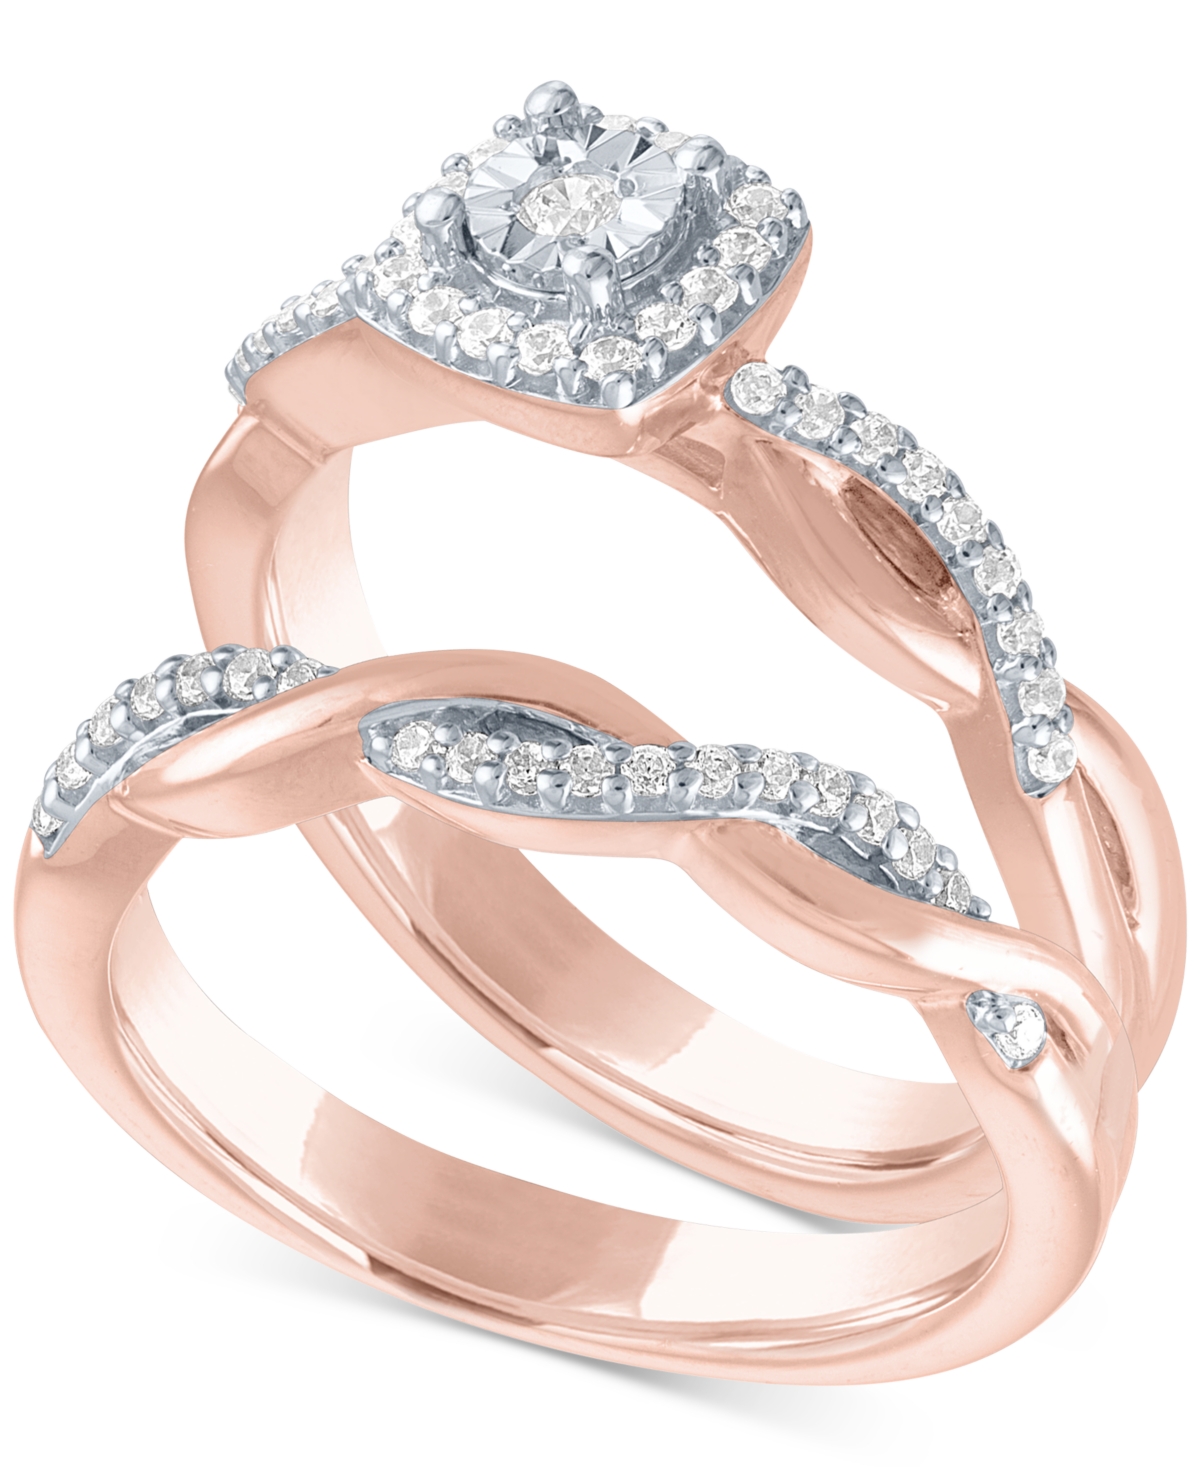 Diamond Bridal Set (1/4 ct. t.w.) in 14k Rose Gold Over Sterling Silver - Rose Gold/Silver